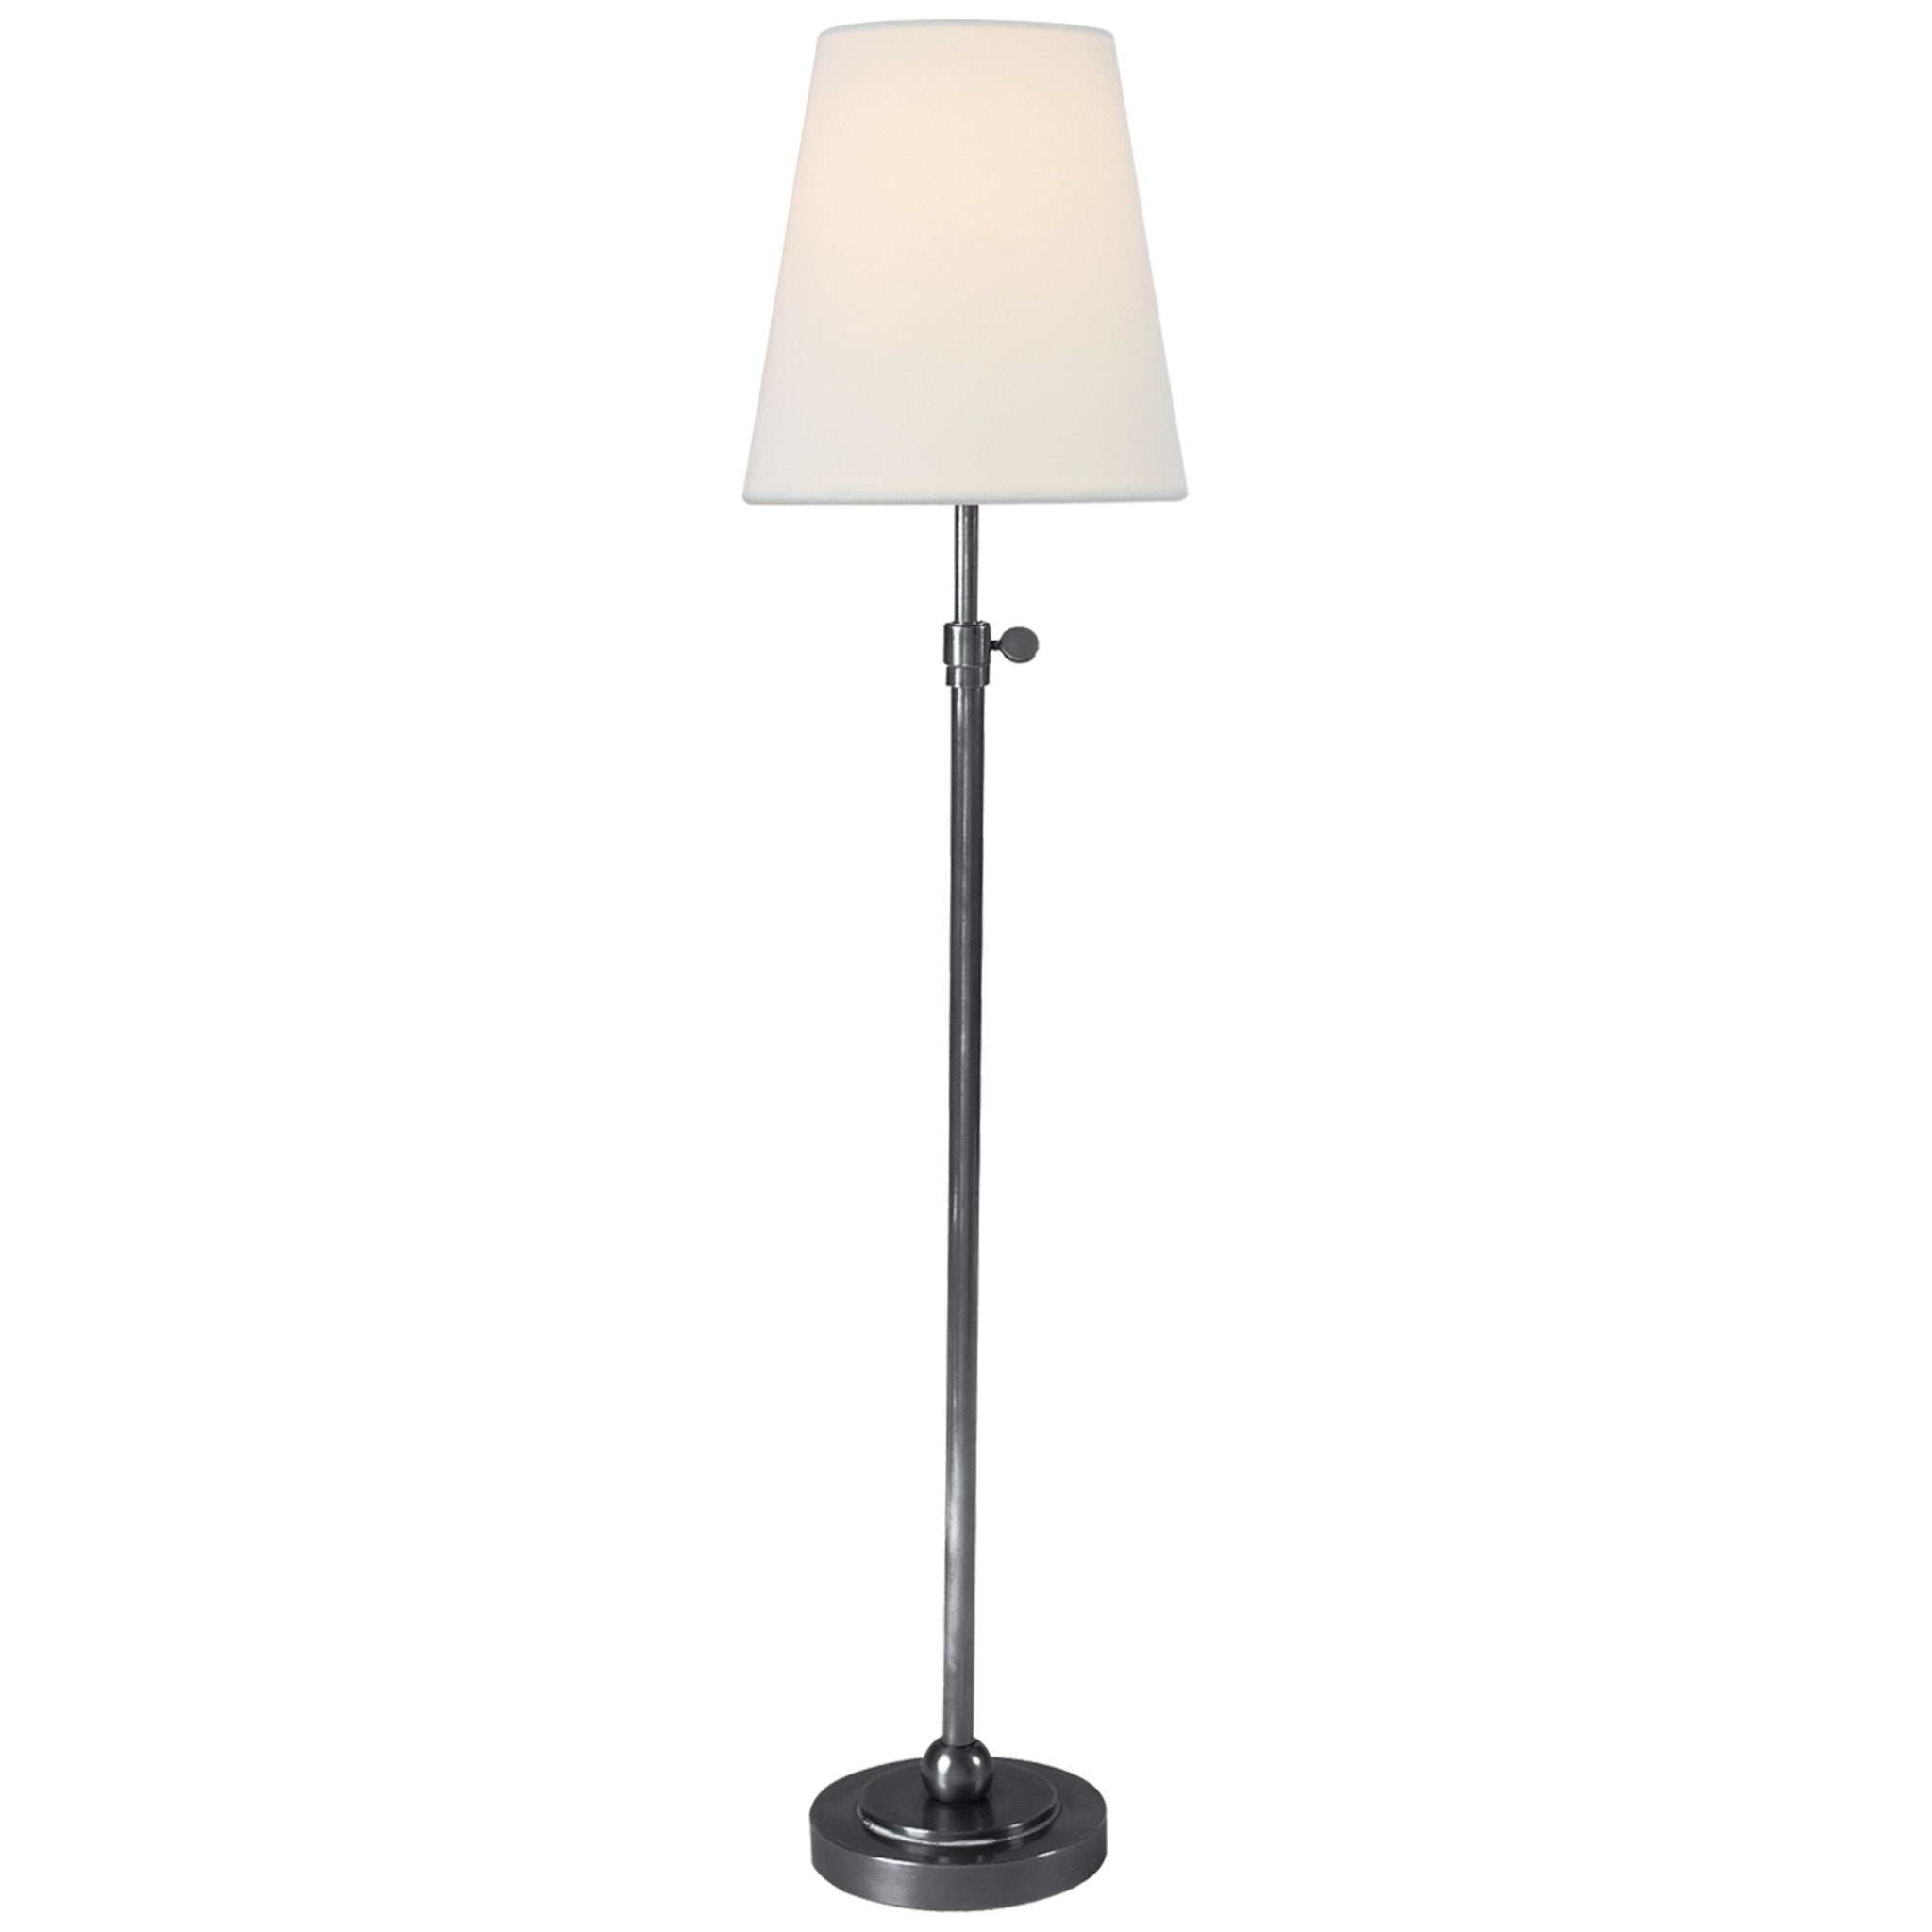 Thomas O'Brien Bryant Table Lamp in Antique Silver with Linen Shade